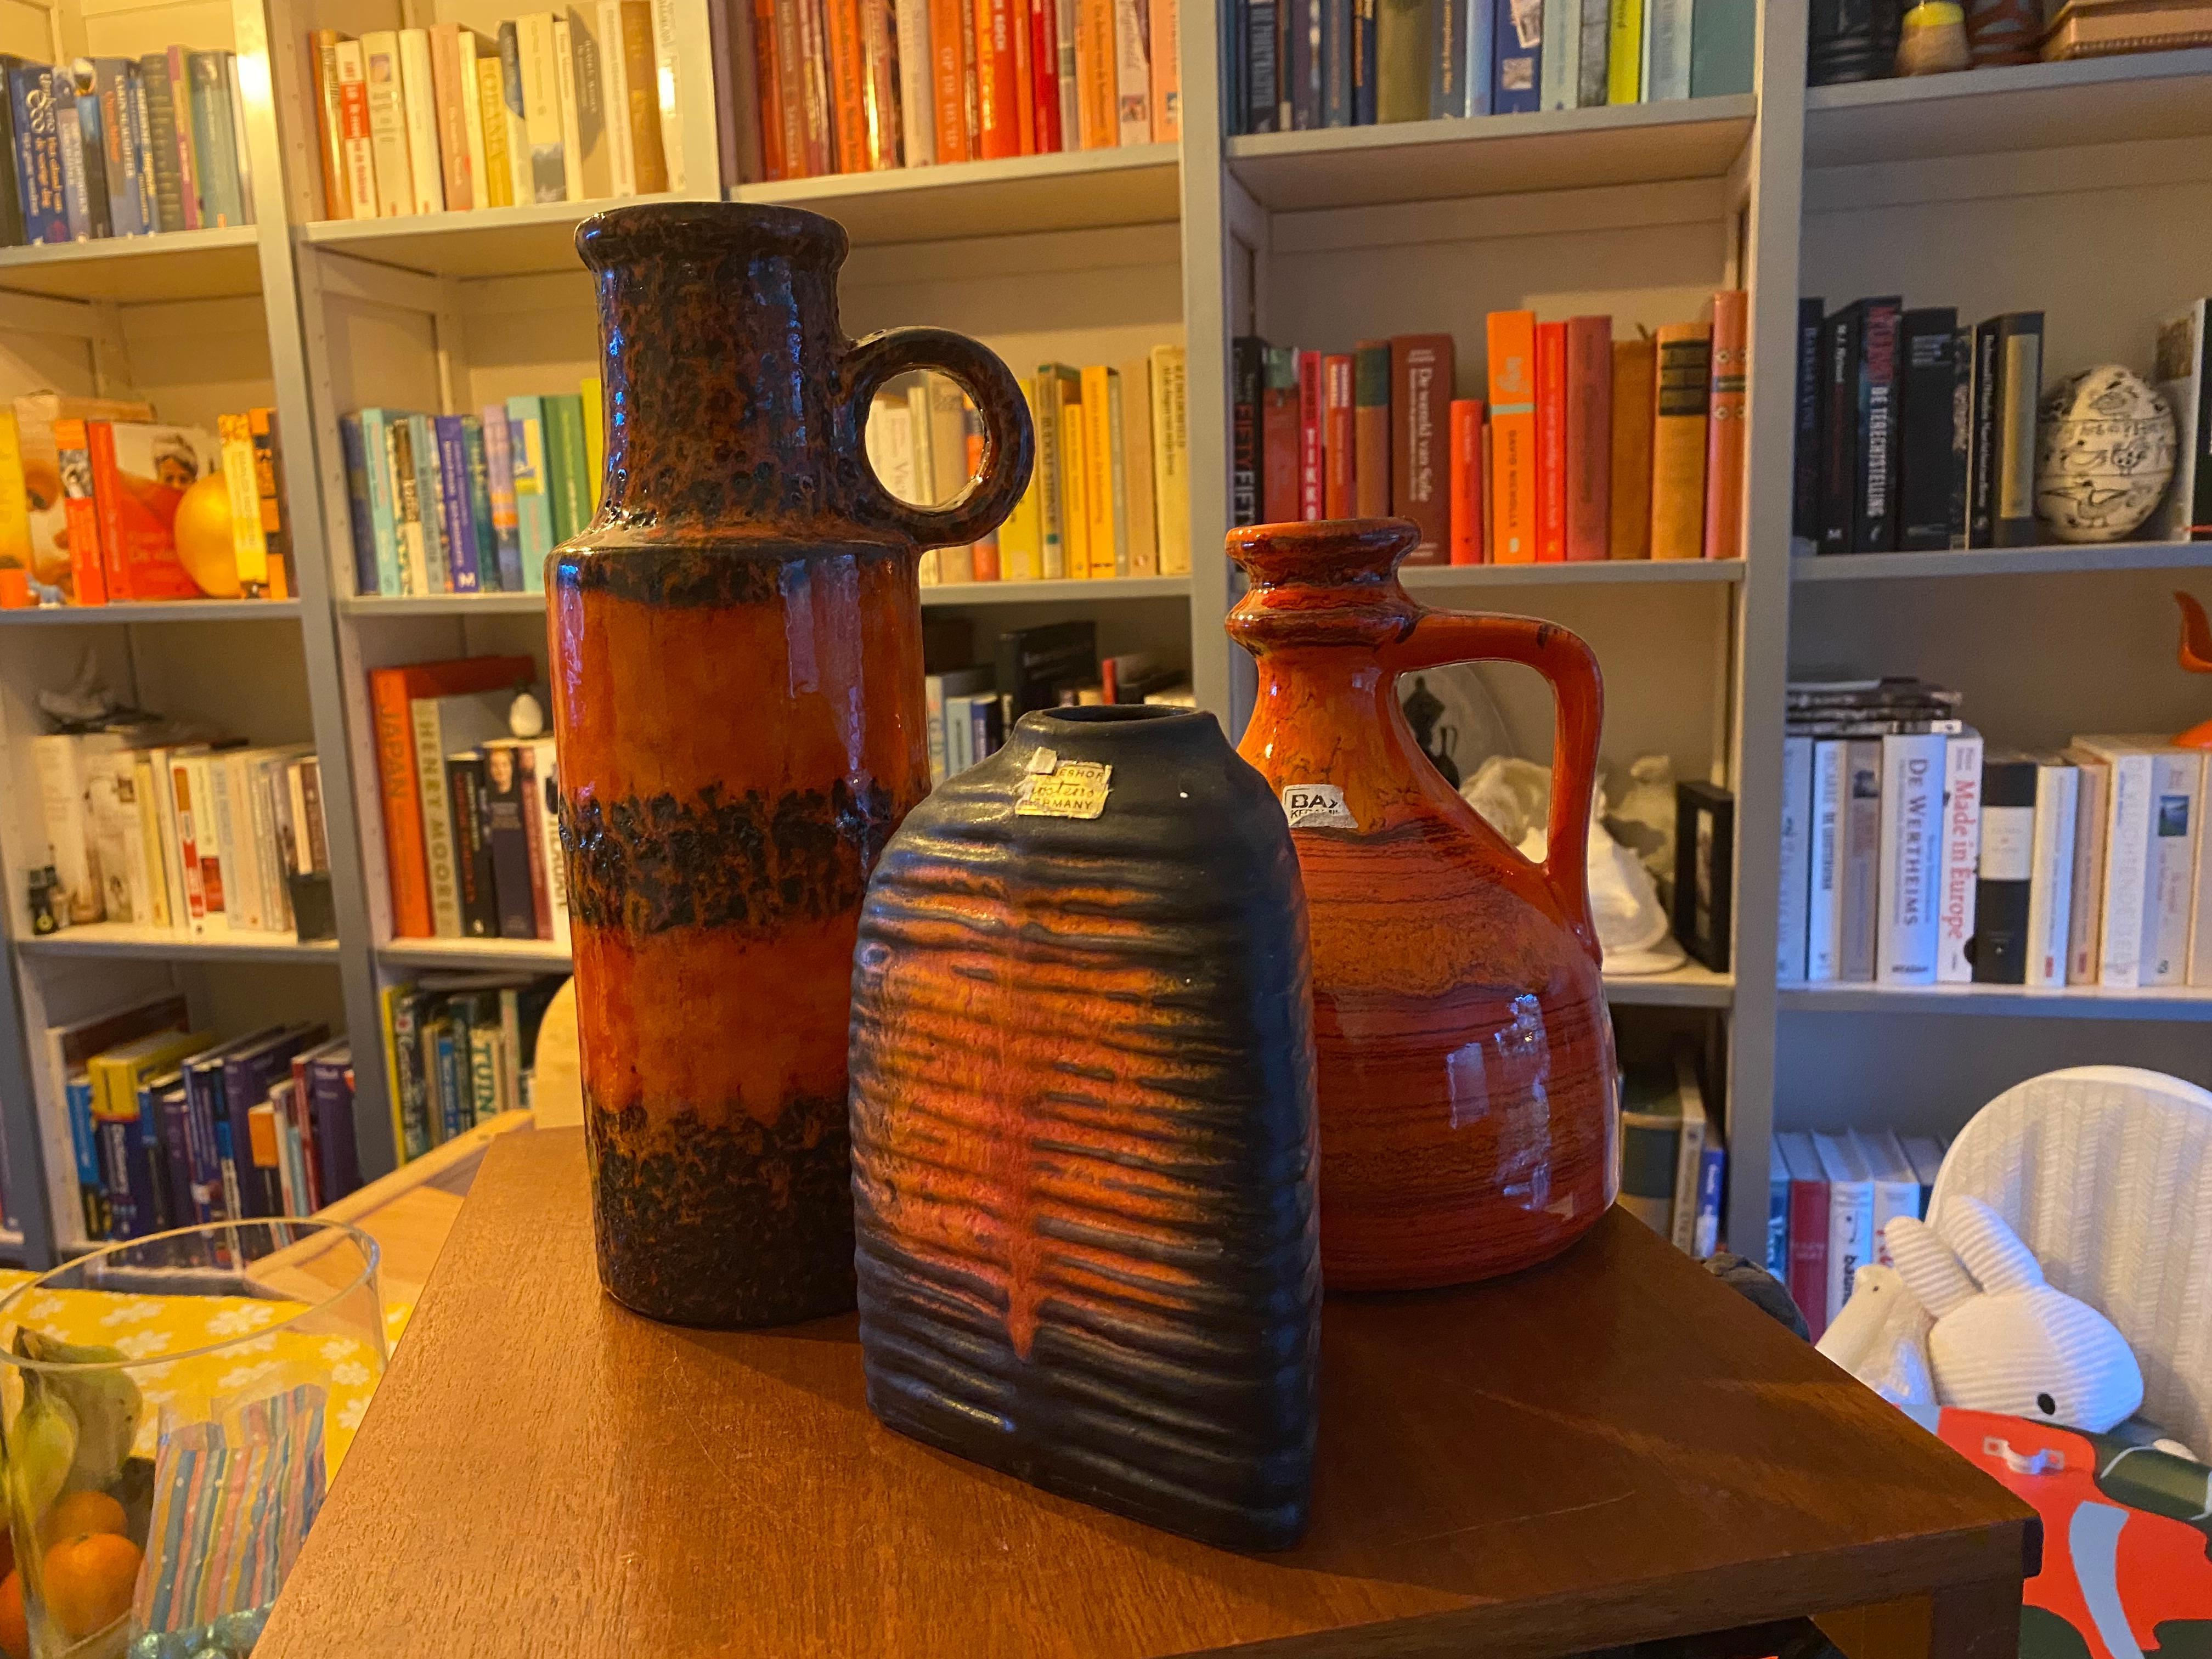 Three vibrant colored vases.
The highest vase is from Scheurich Keramik and the height is 28 cm

The orange vase is from Bay Keramik and its height is 20 cm

The triangle vase is from Carstens Tonnieshof Keramik and this one is 17 cm